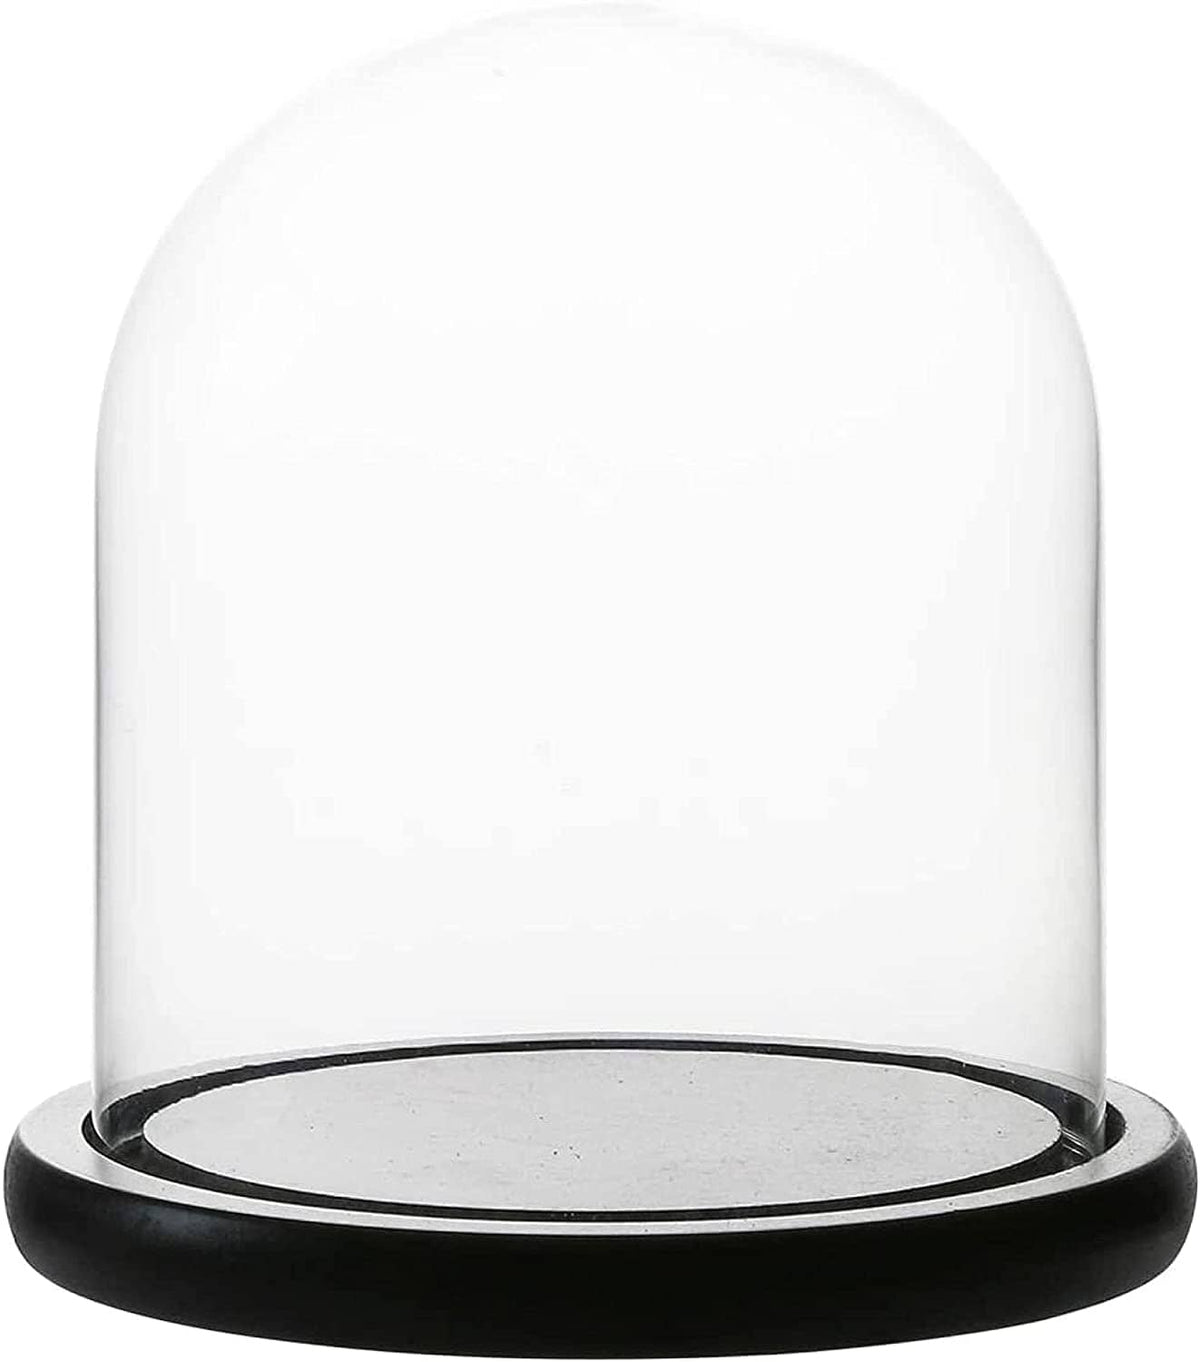 Decorative Clear Glass Dome/Tabletop Centerpiece Cloche Bell Jar Display Case with Black